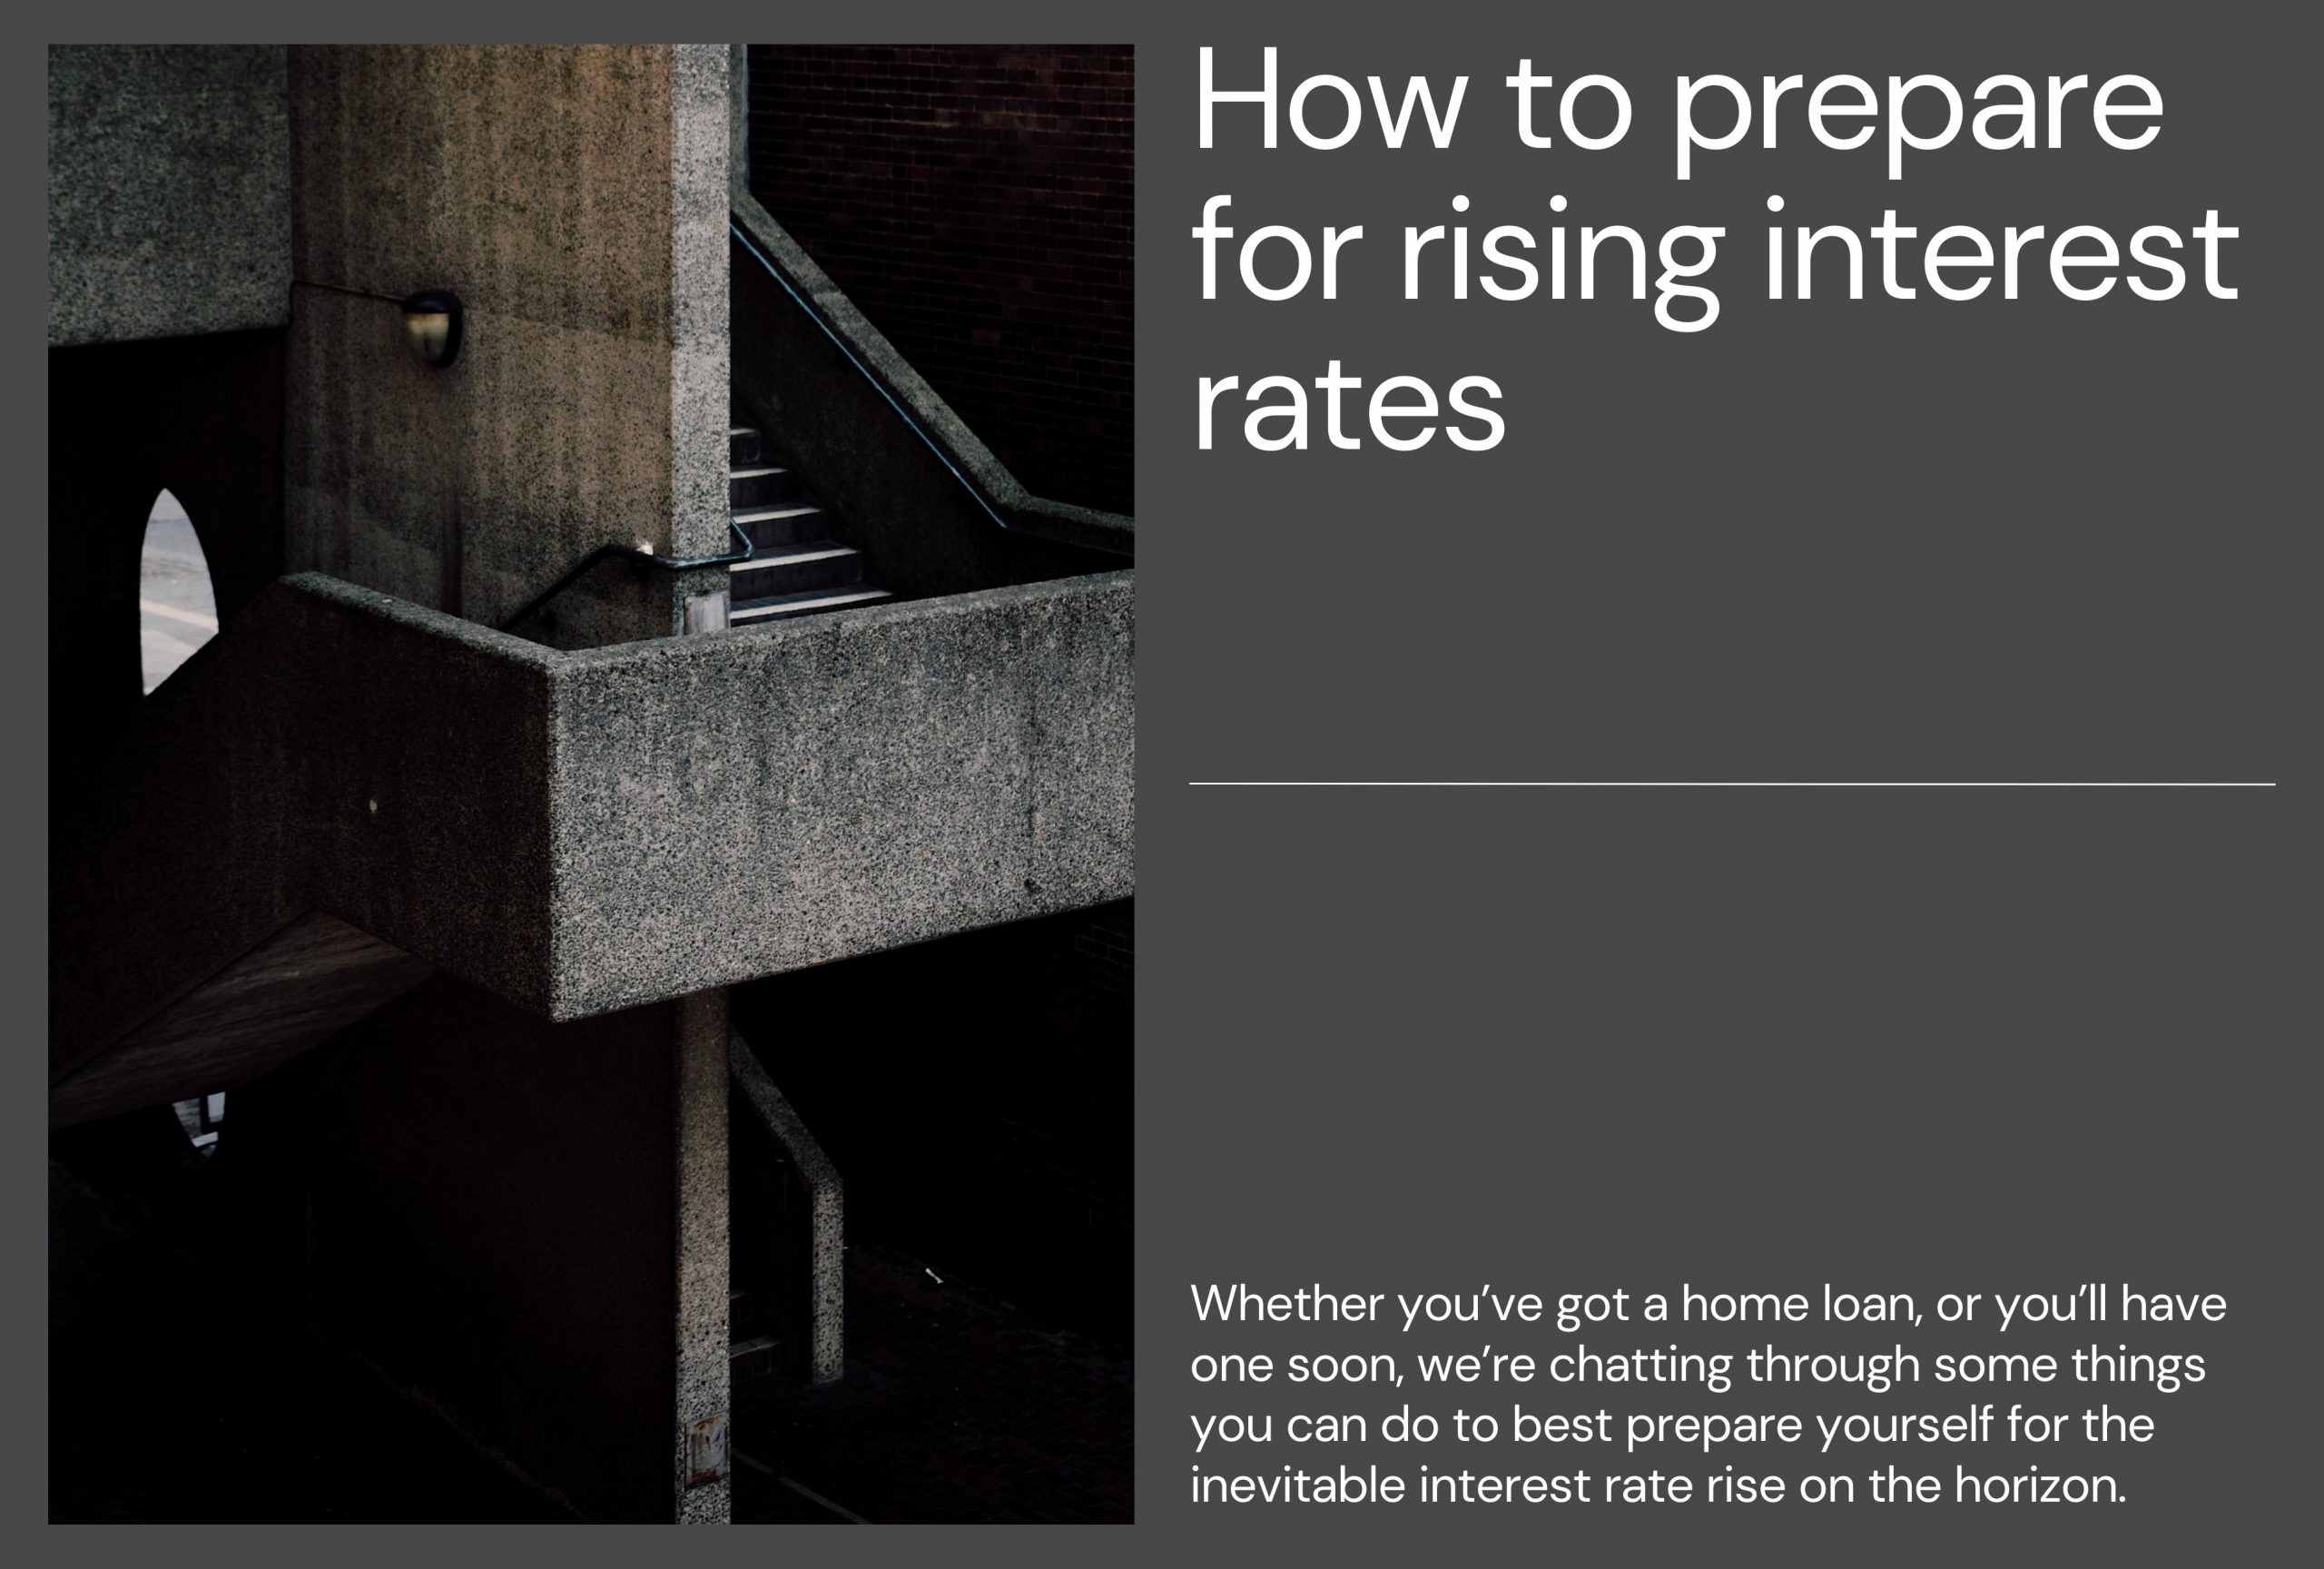 How to prepare for rising interest rates